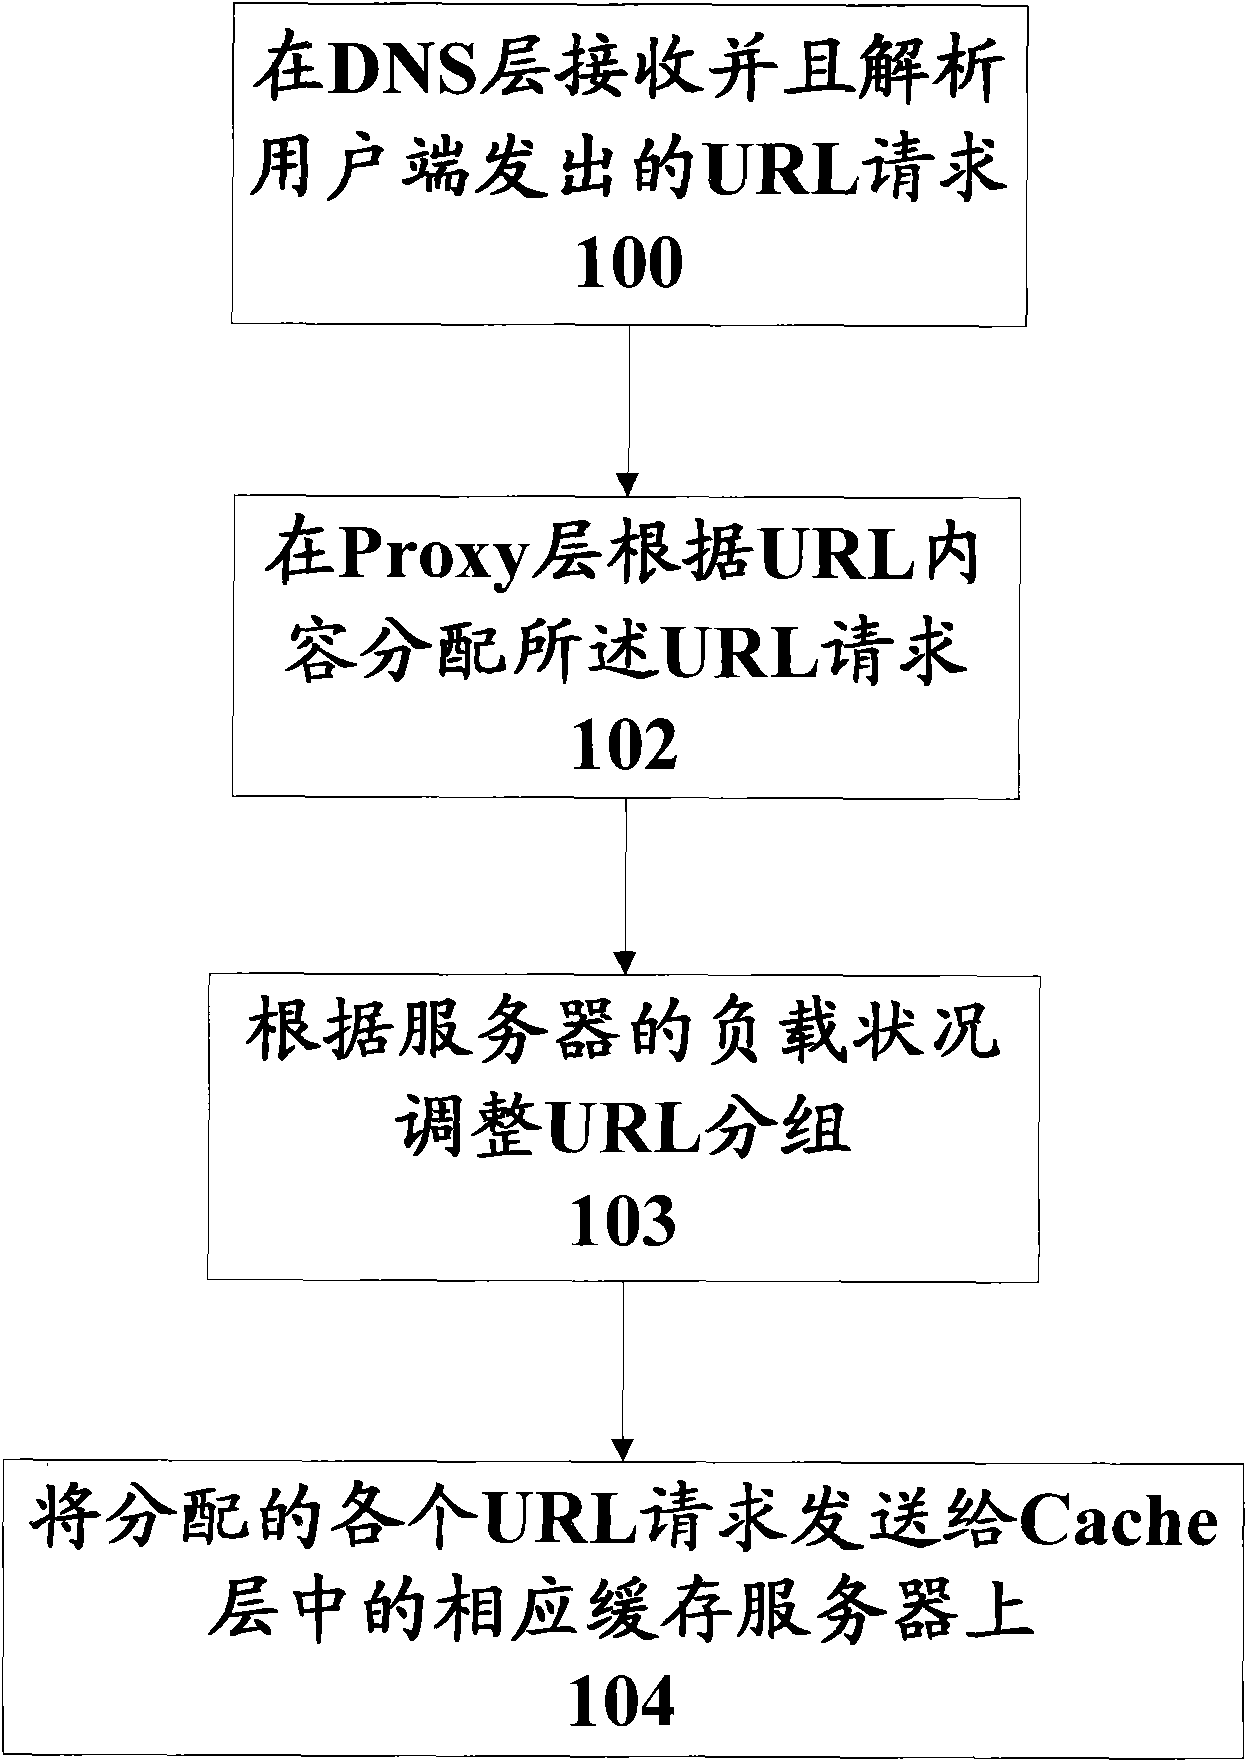 Load balancing method and system applied to three-layer network